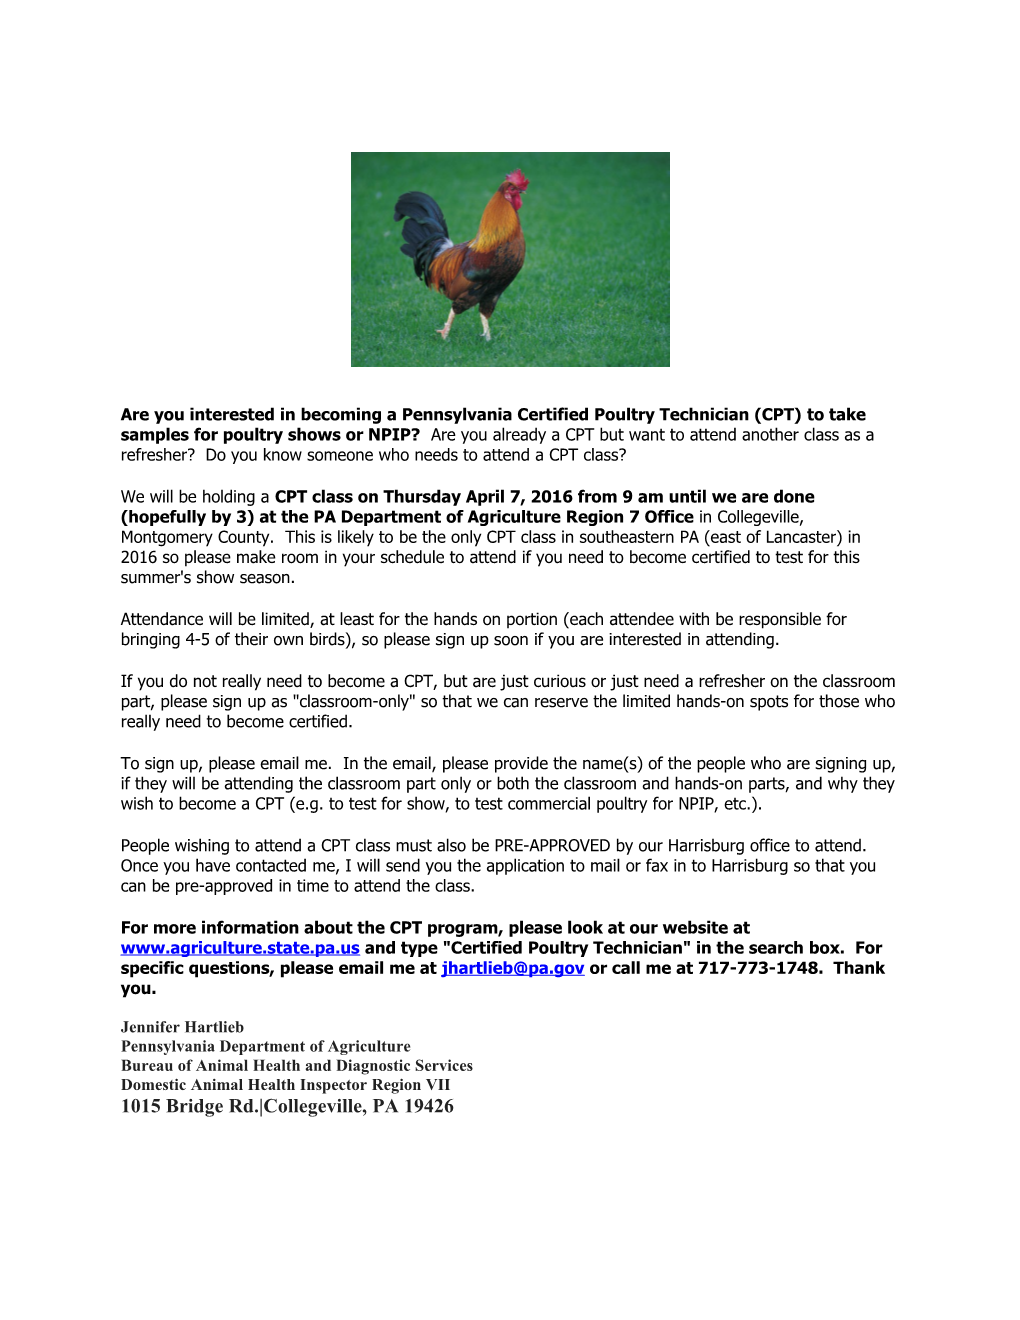 Are You Interested in Becoming a Pennsylvania Certified Poultry Technician (CPT) to Take